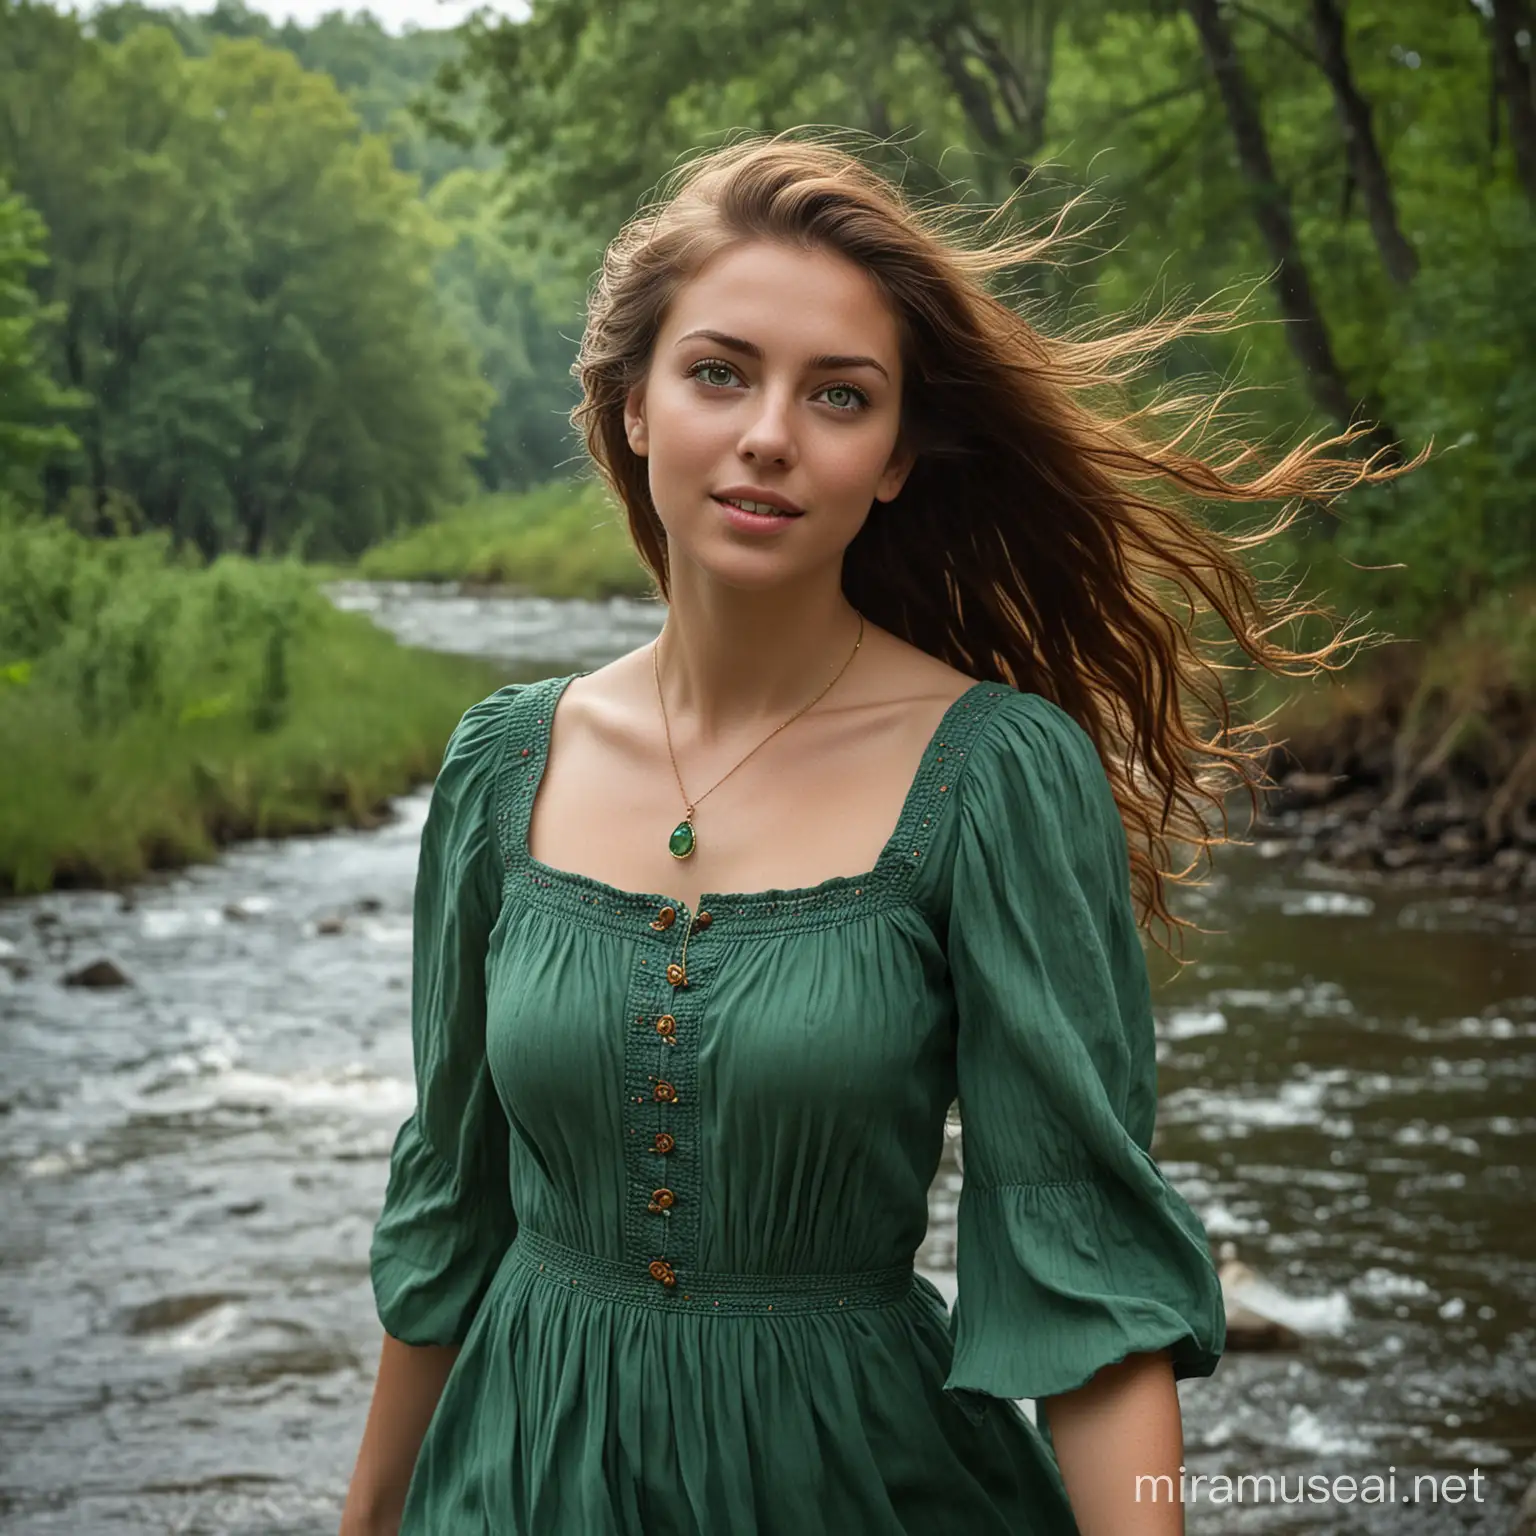 a beautiful young woman, 20 years old, brown hair the has tinges of red when it hits the light, blowing in the wind. part of her hair is pulled back. Green eyes. She's in a green peasant style dress. She wears a simple, clear, blue stone necklace. forest background with a river with particle of light hanging in the air. Stormy sky.